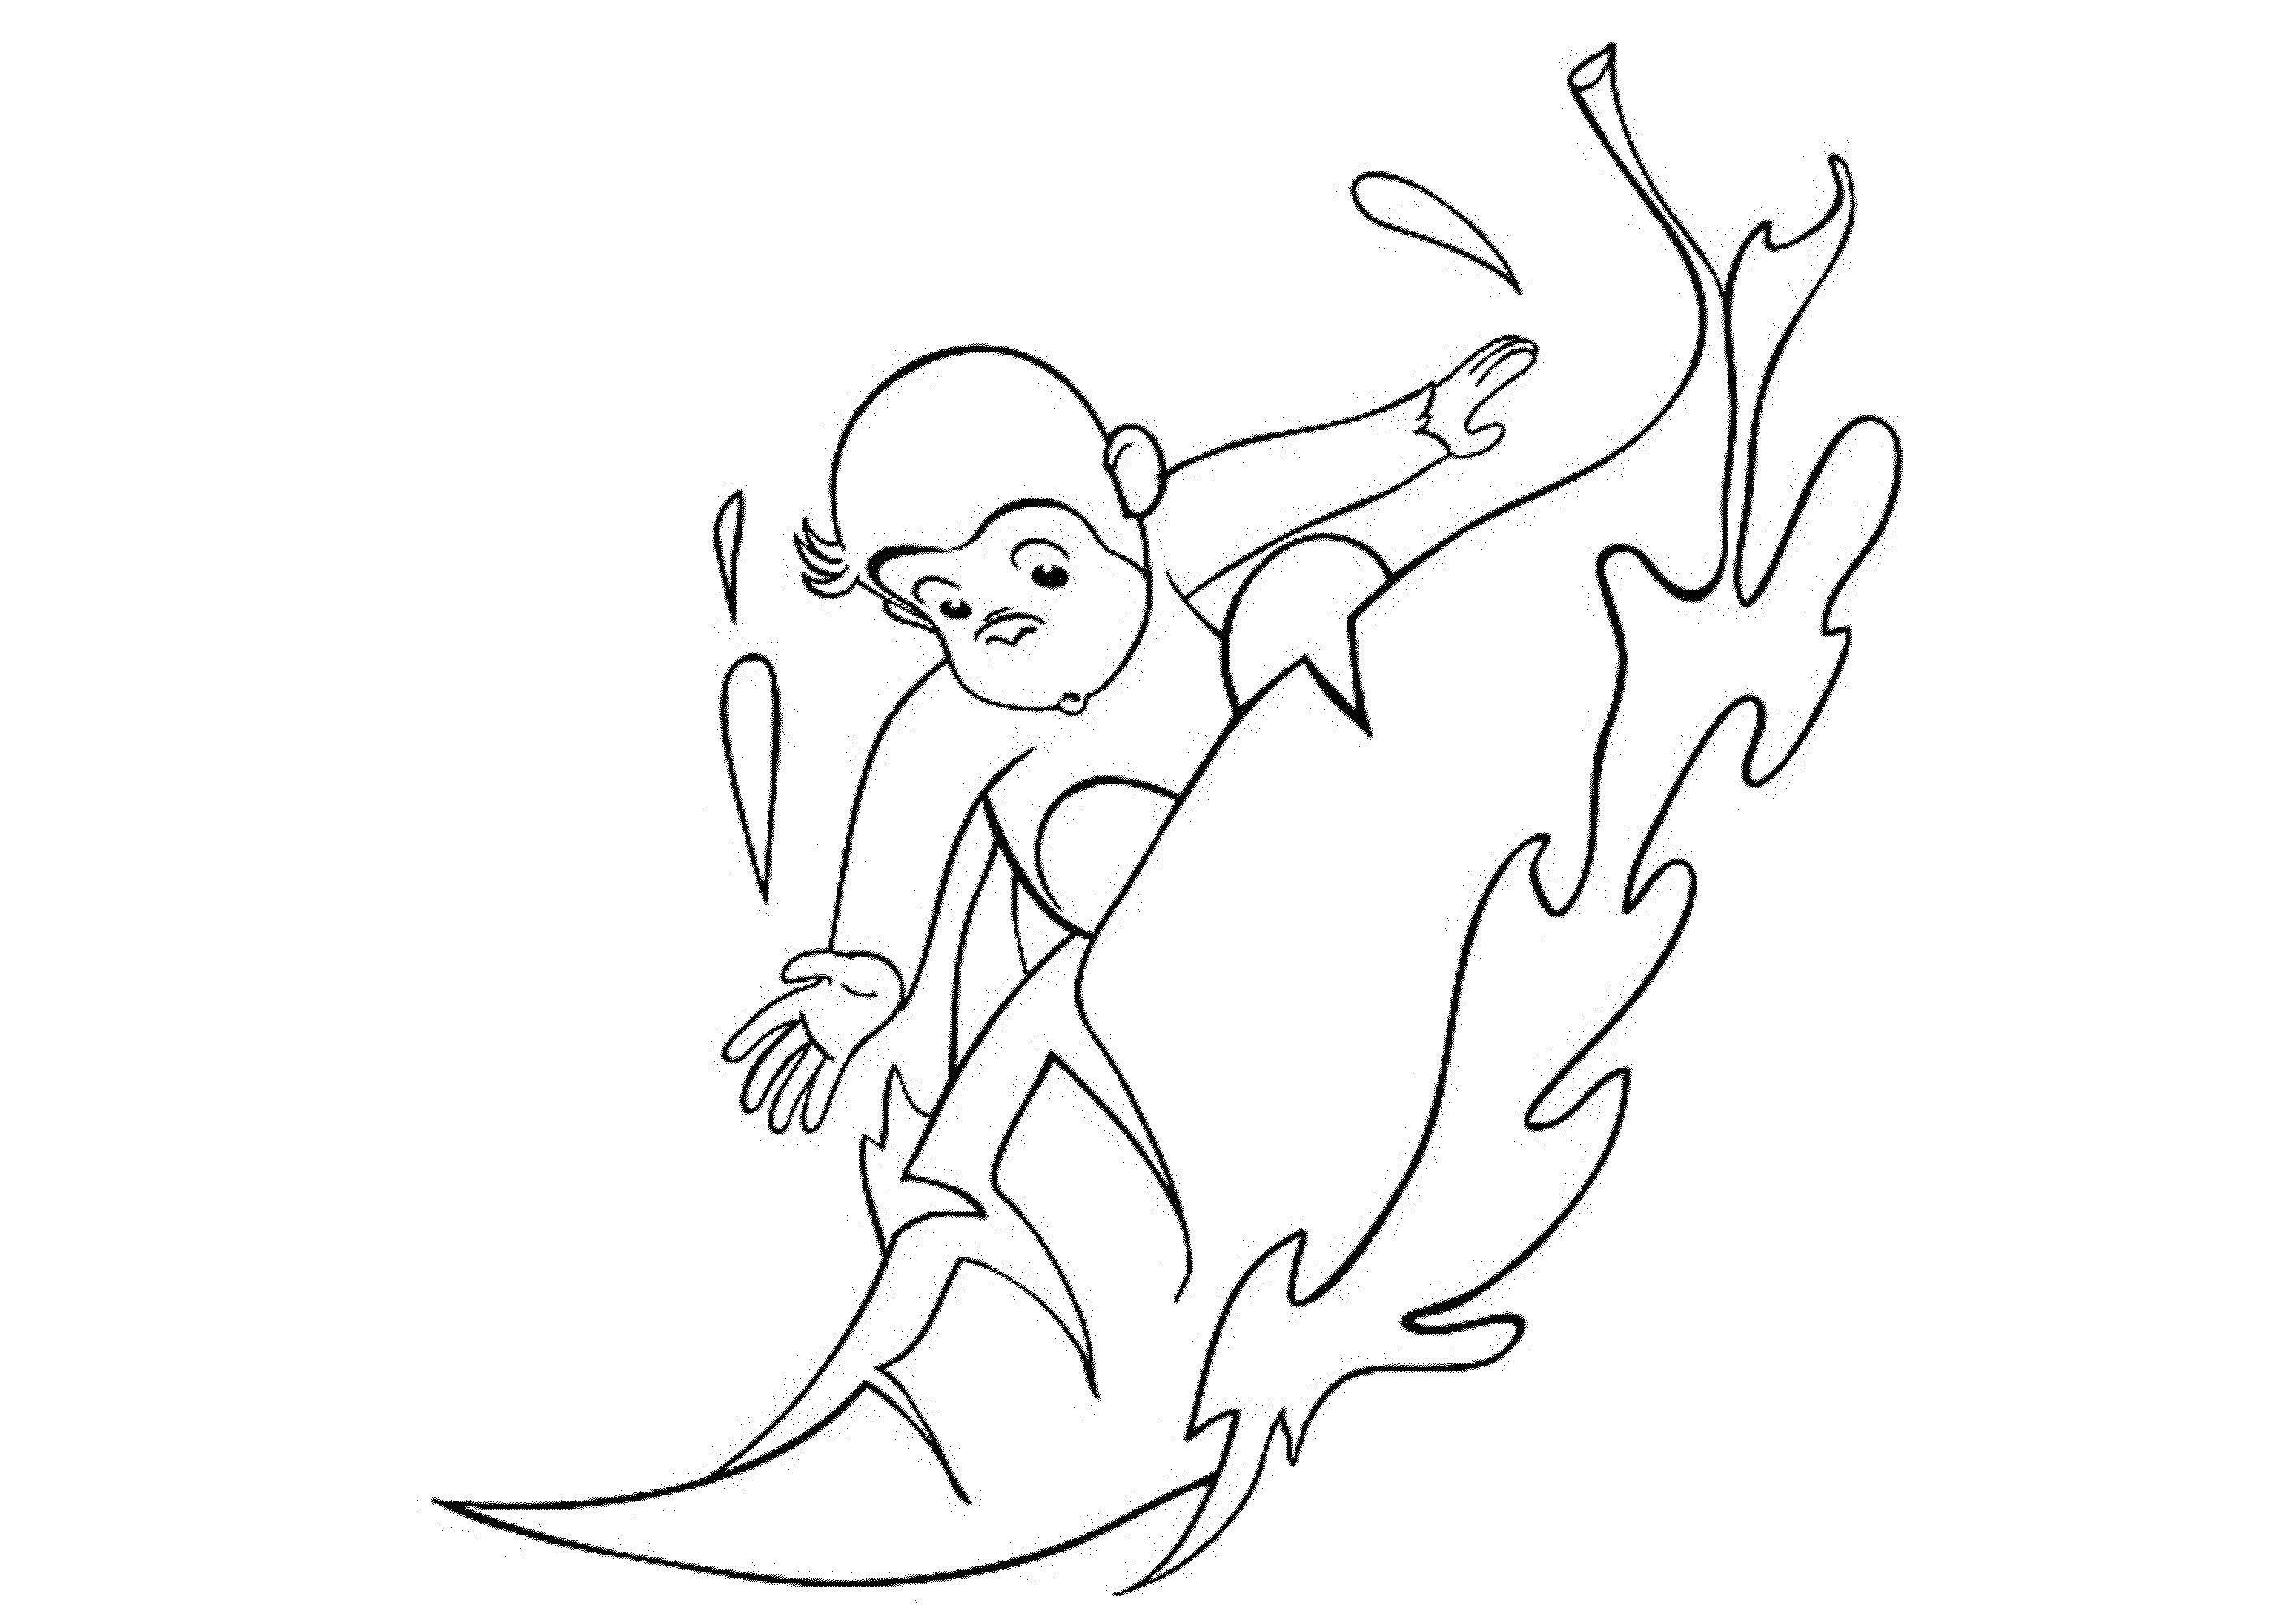 Coloring Monkey and leaf. Category coloring. Tags:  monkey , leaf, water.